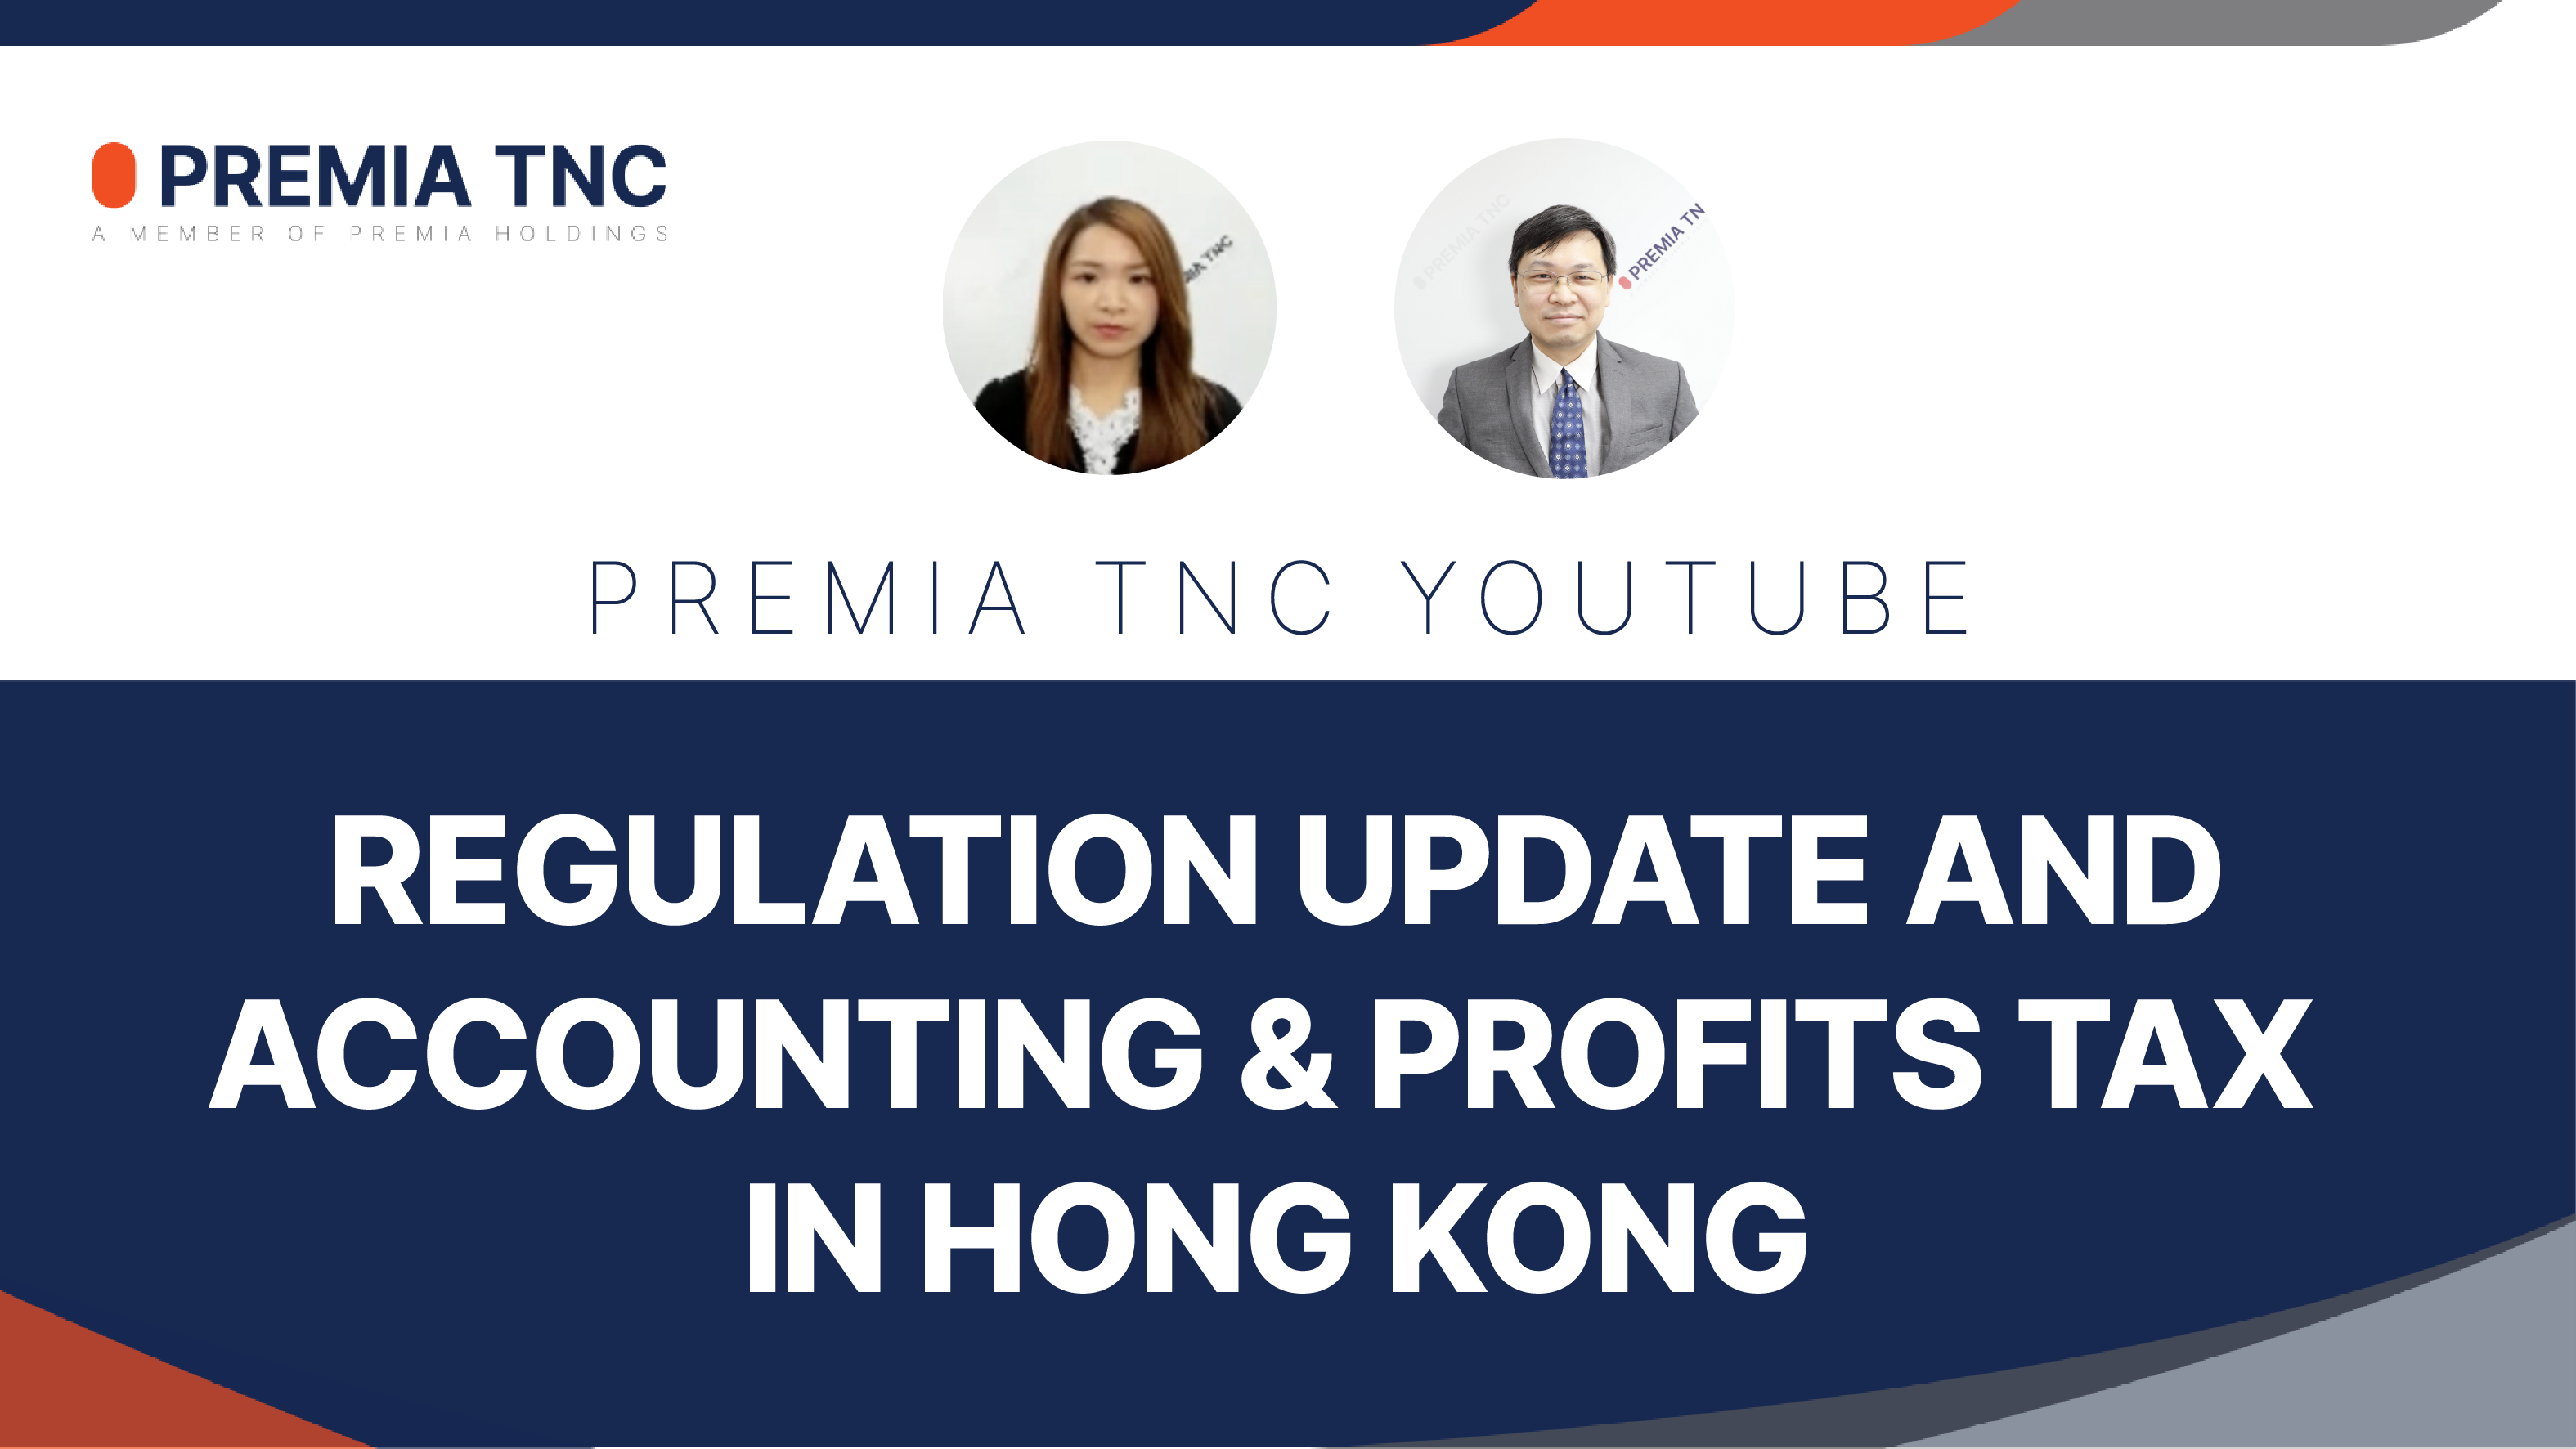 REGULATION UPDATE AND ACCOUNTING & PROFITS TAX IN HONG KONG